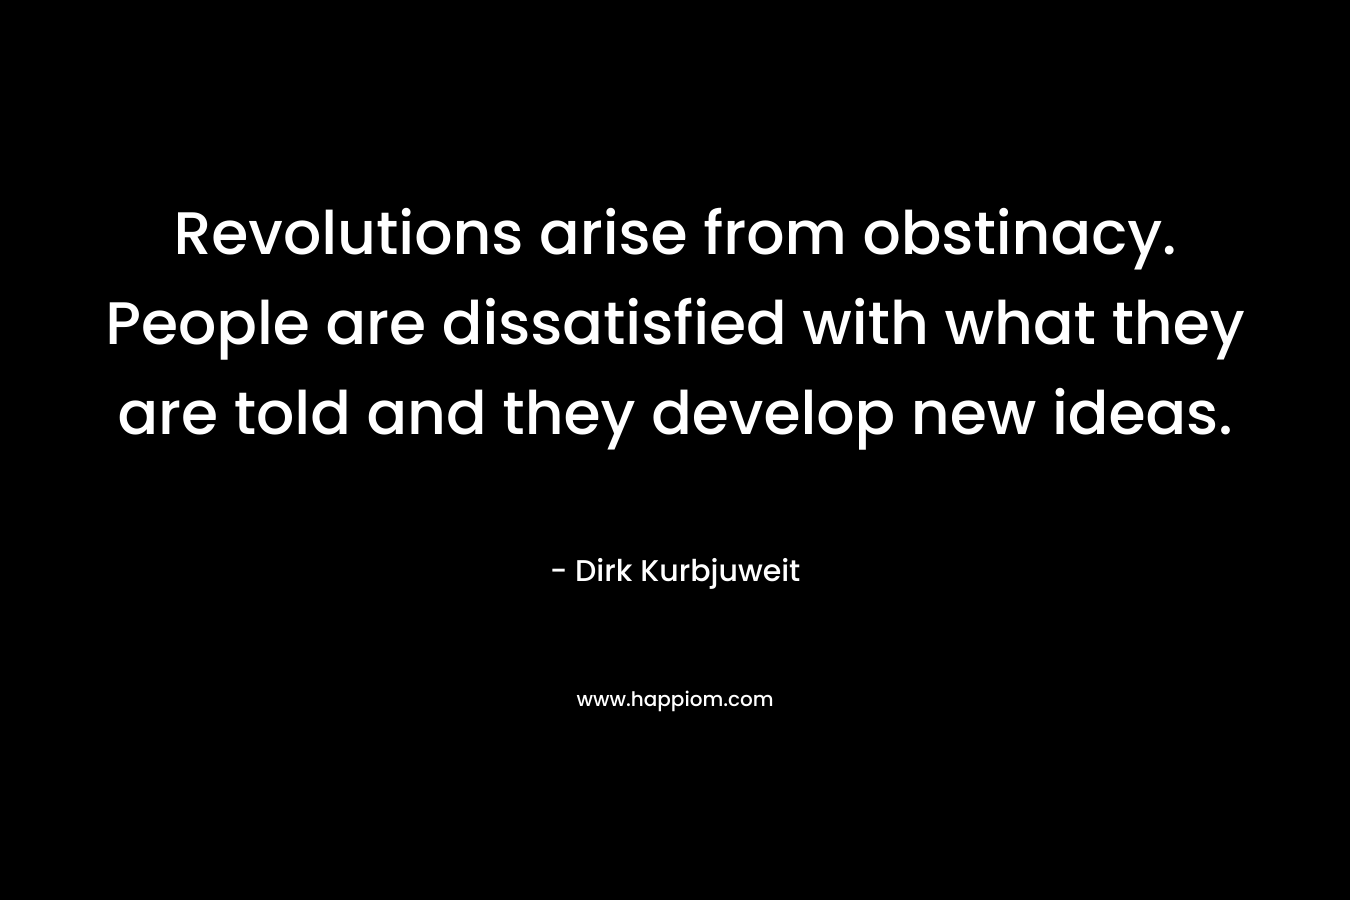 Revolutions arise from obstinacy. People are dissatisfied with what they are told and they develop new ideas. – Dirk Kurbjuweit